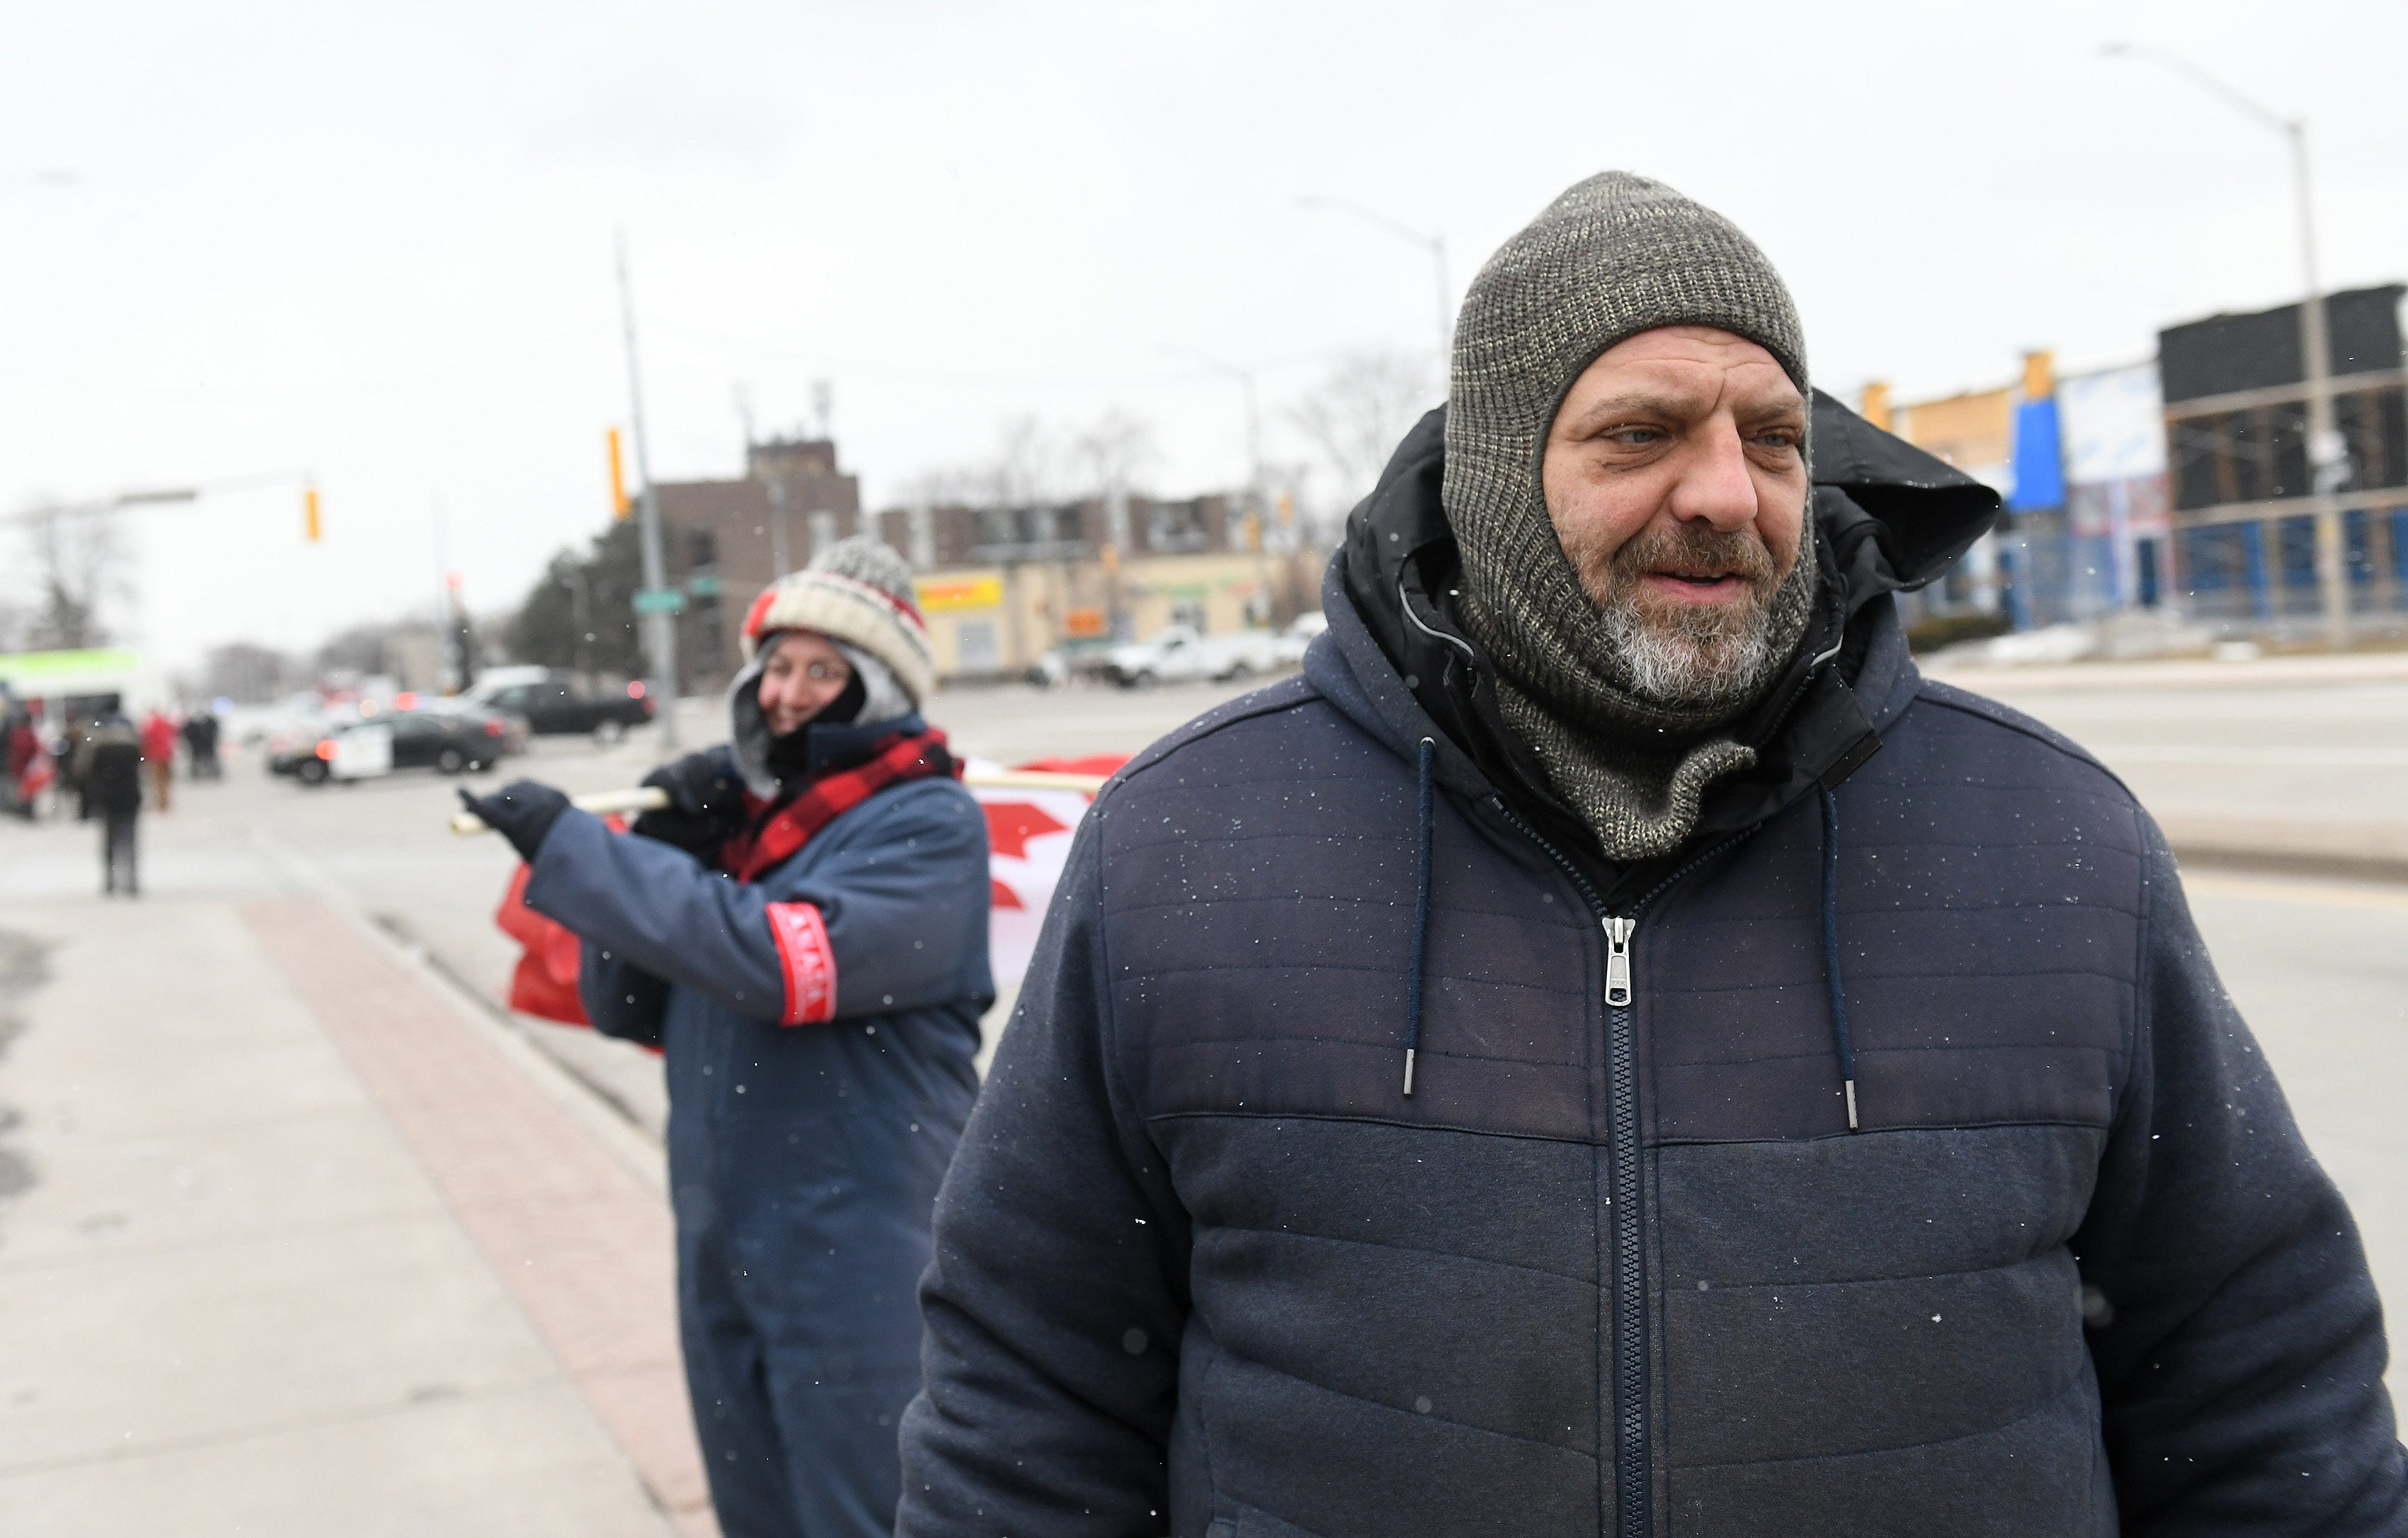 Richard Drouillard, 40, of Windsor talks about being out to protest COVID vaccination mandates by the Canadian government in Windsor, Ontario, on Feb. 13, 2022.  
(Robin Buckson / The Detroit News)